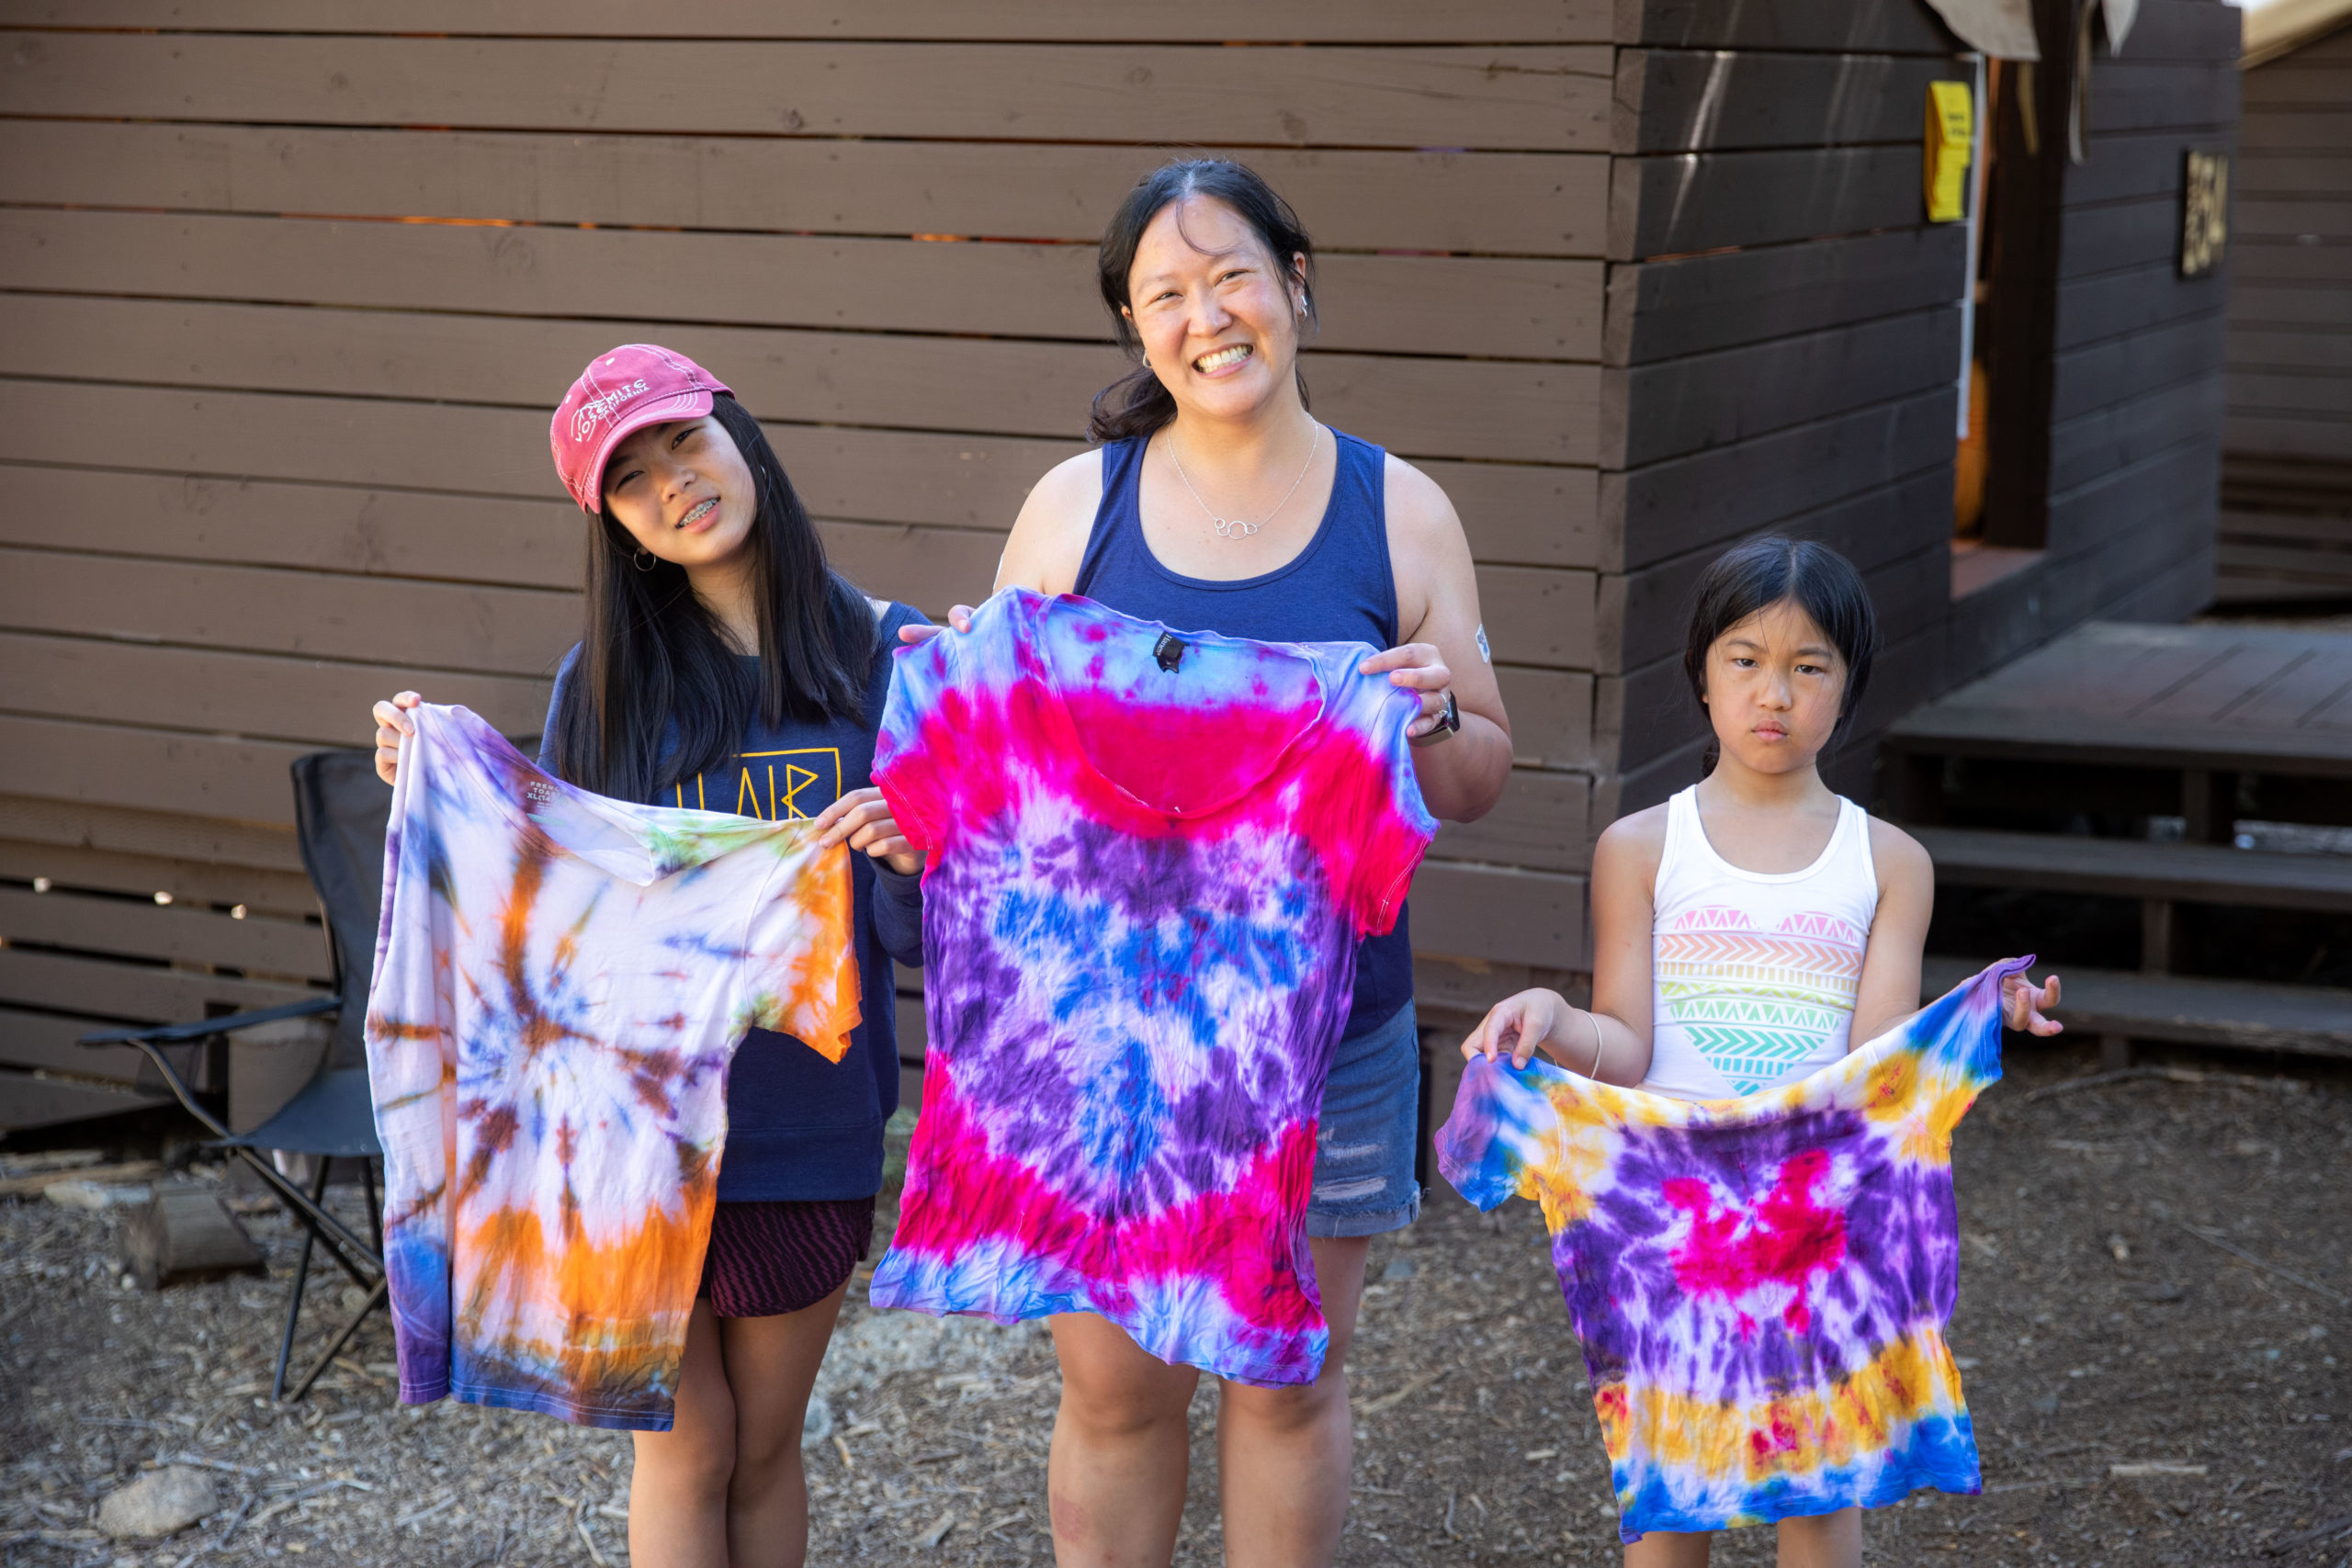 Family tie-dye at the Lair